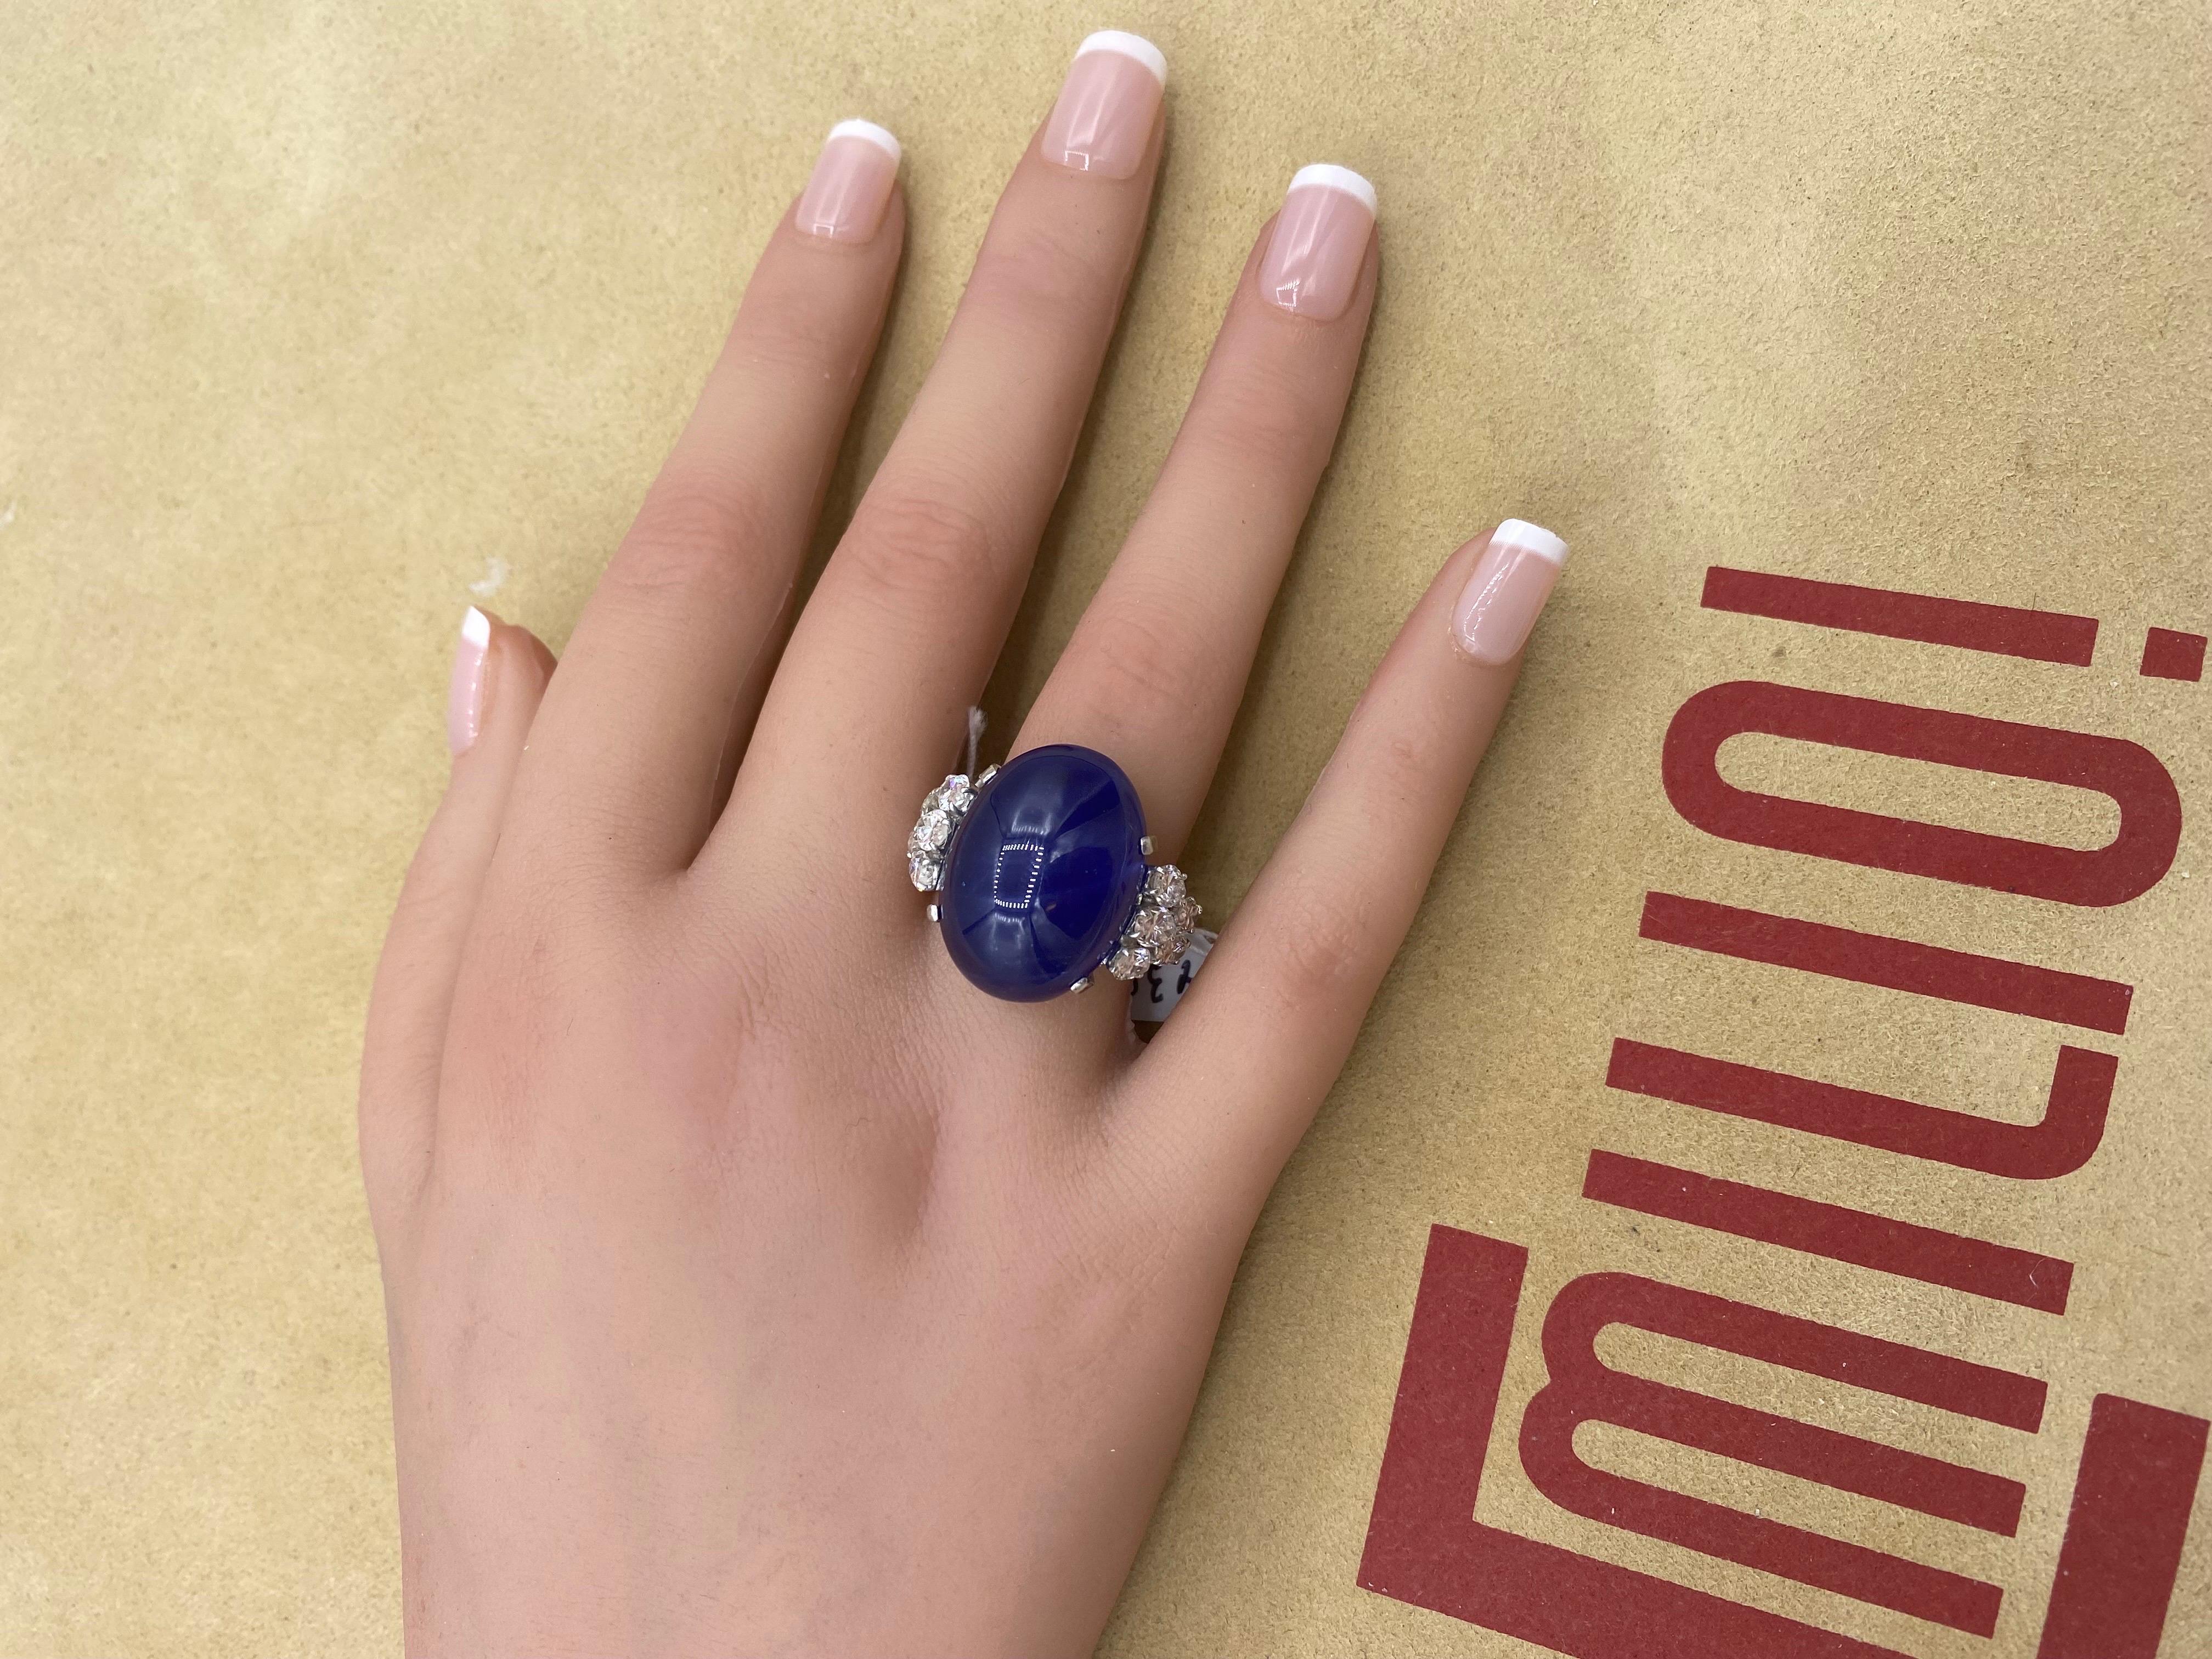 From Emilio Jewelry a well known dealer located on New York's iconic Fifth Avenue,
The focal point of this magnificent ring is the 41.18ct AGL Certified Star Cabochon sapphire of cornflower blue color. The stone is eye clean. 
Diamonds are